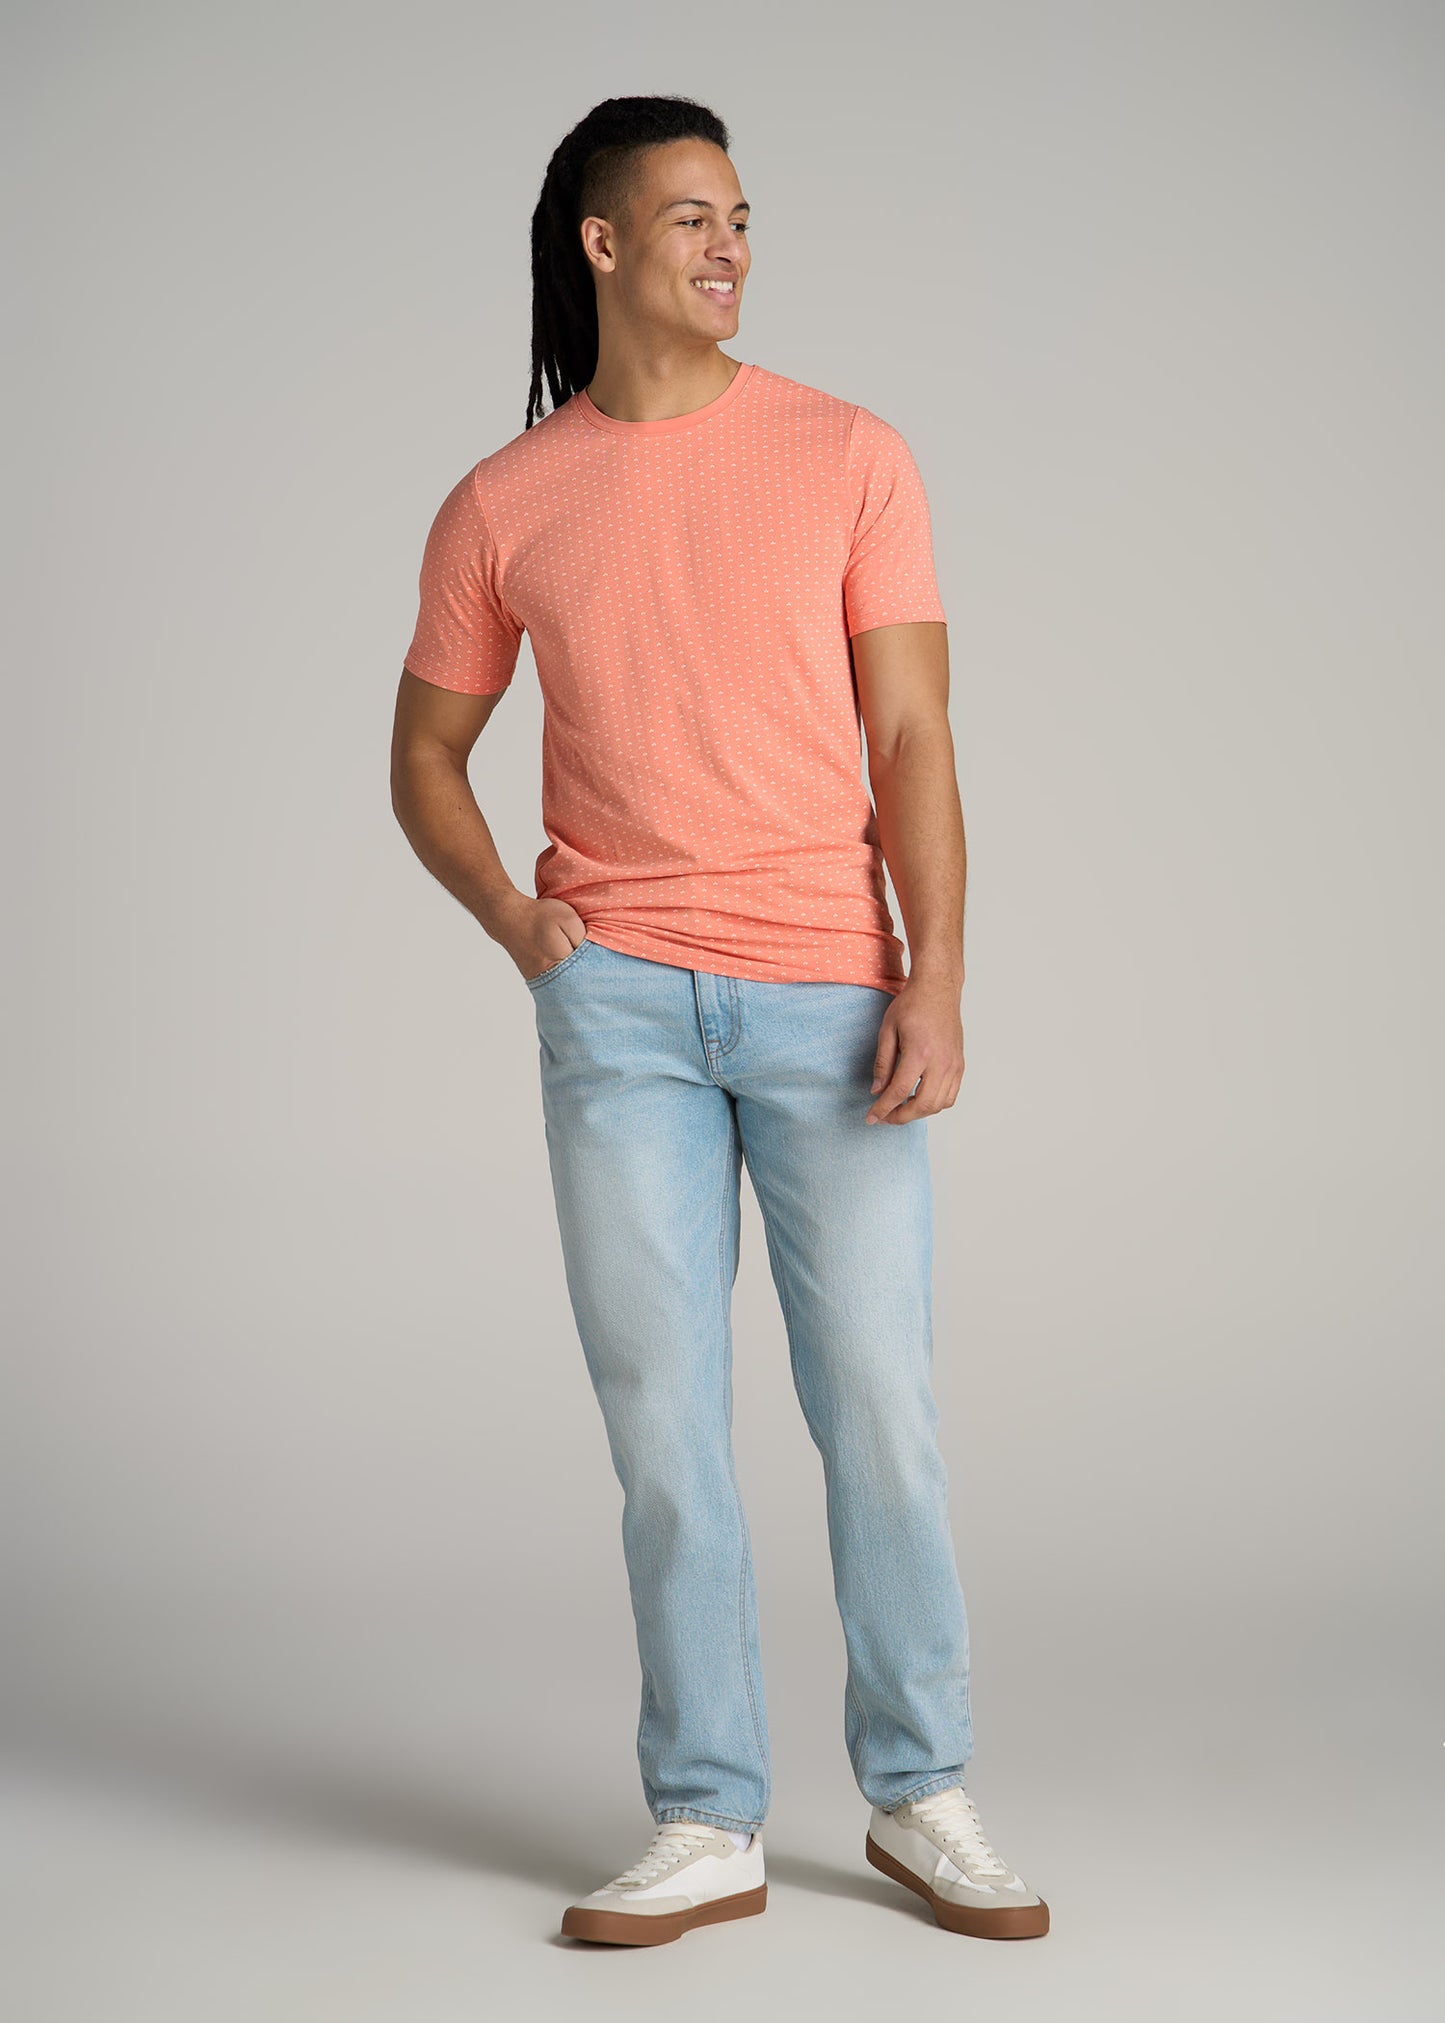 Stretch Pima Cotton Printed Tee for Tall Men in Apricot Mini Floral